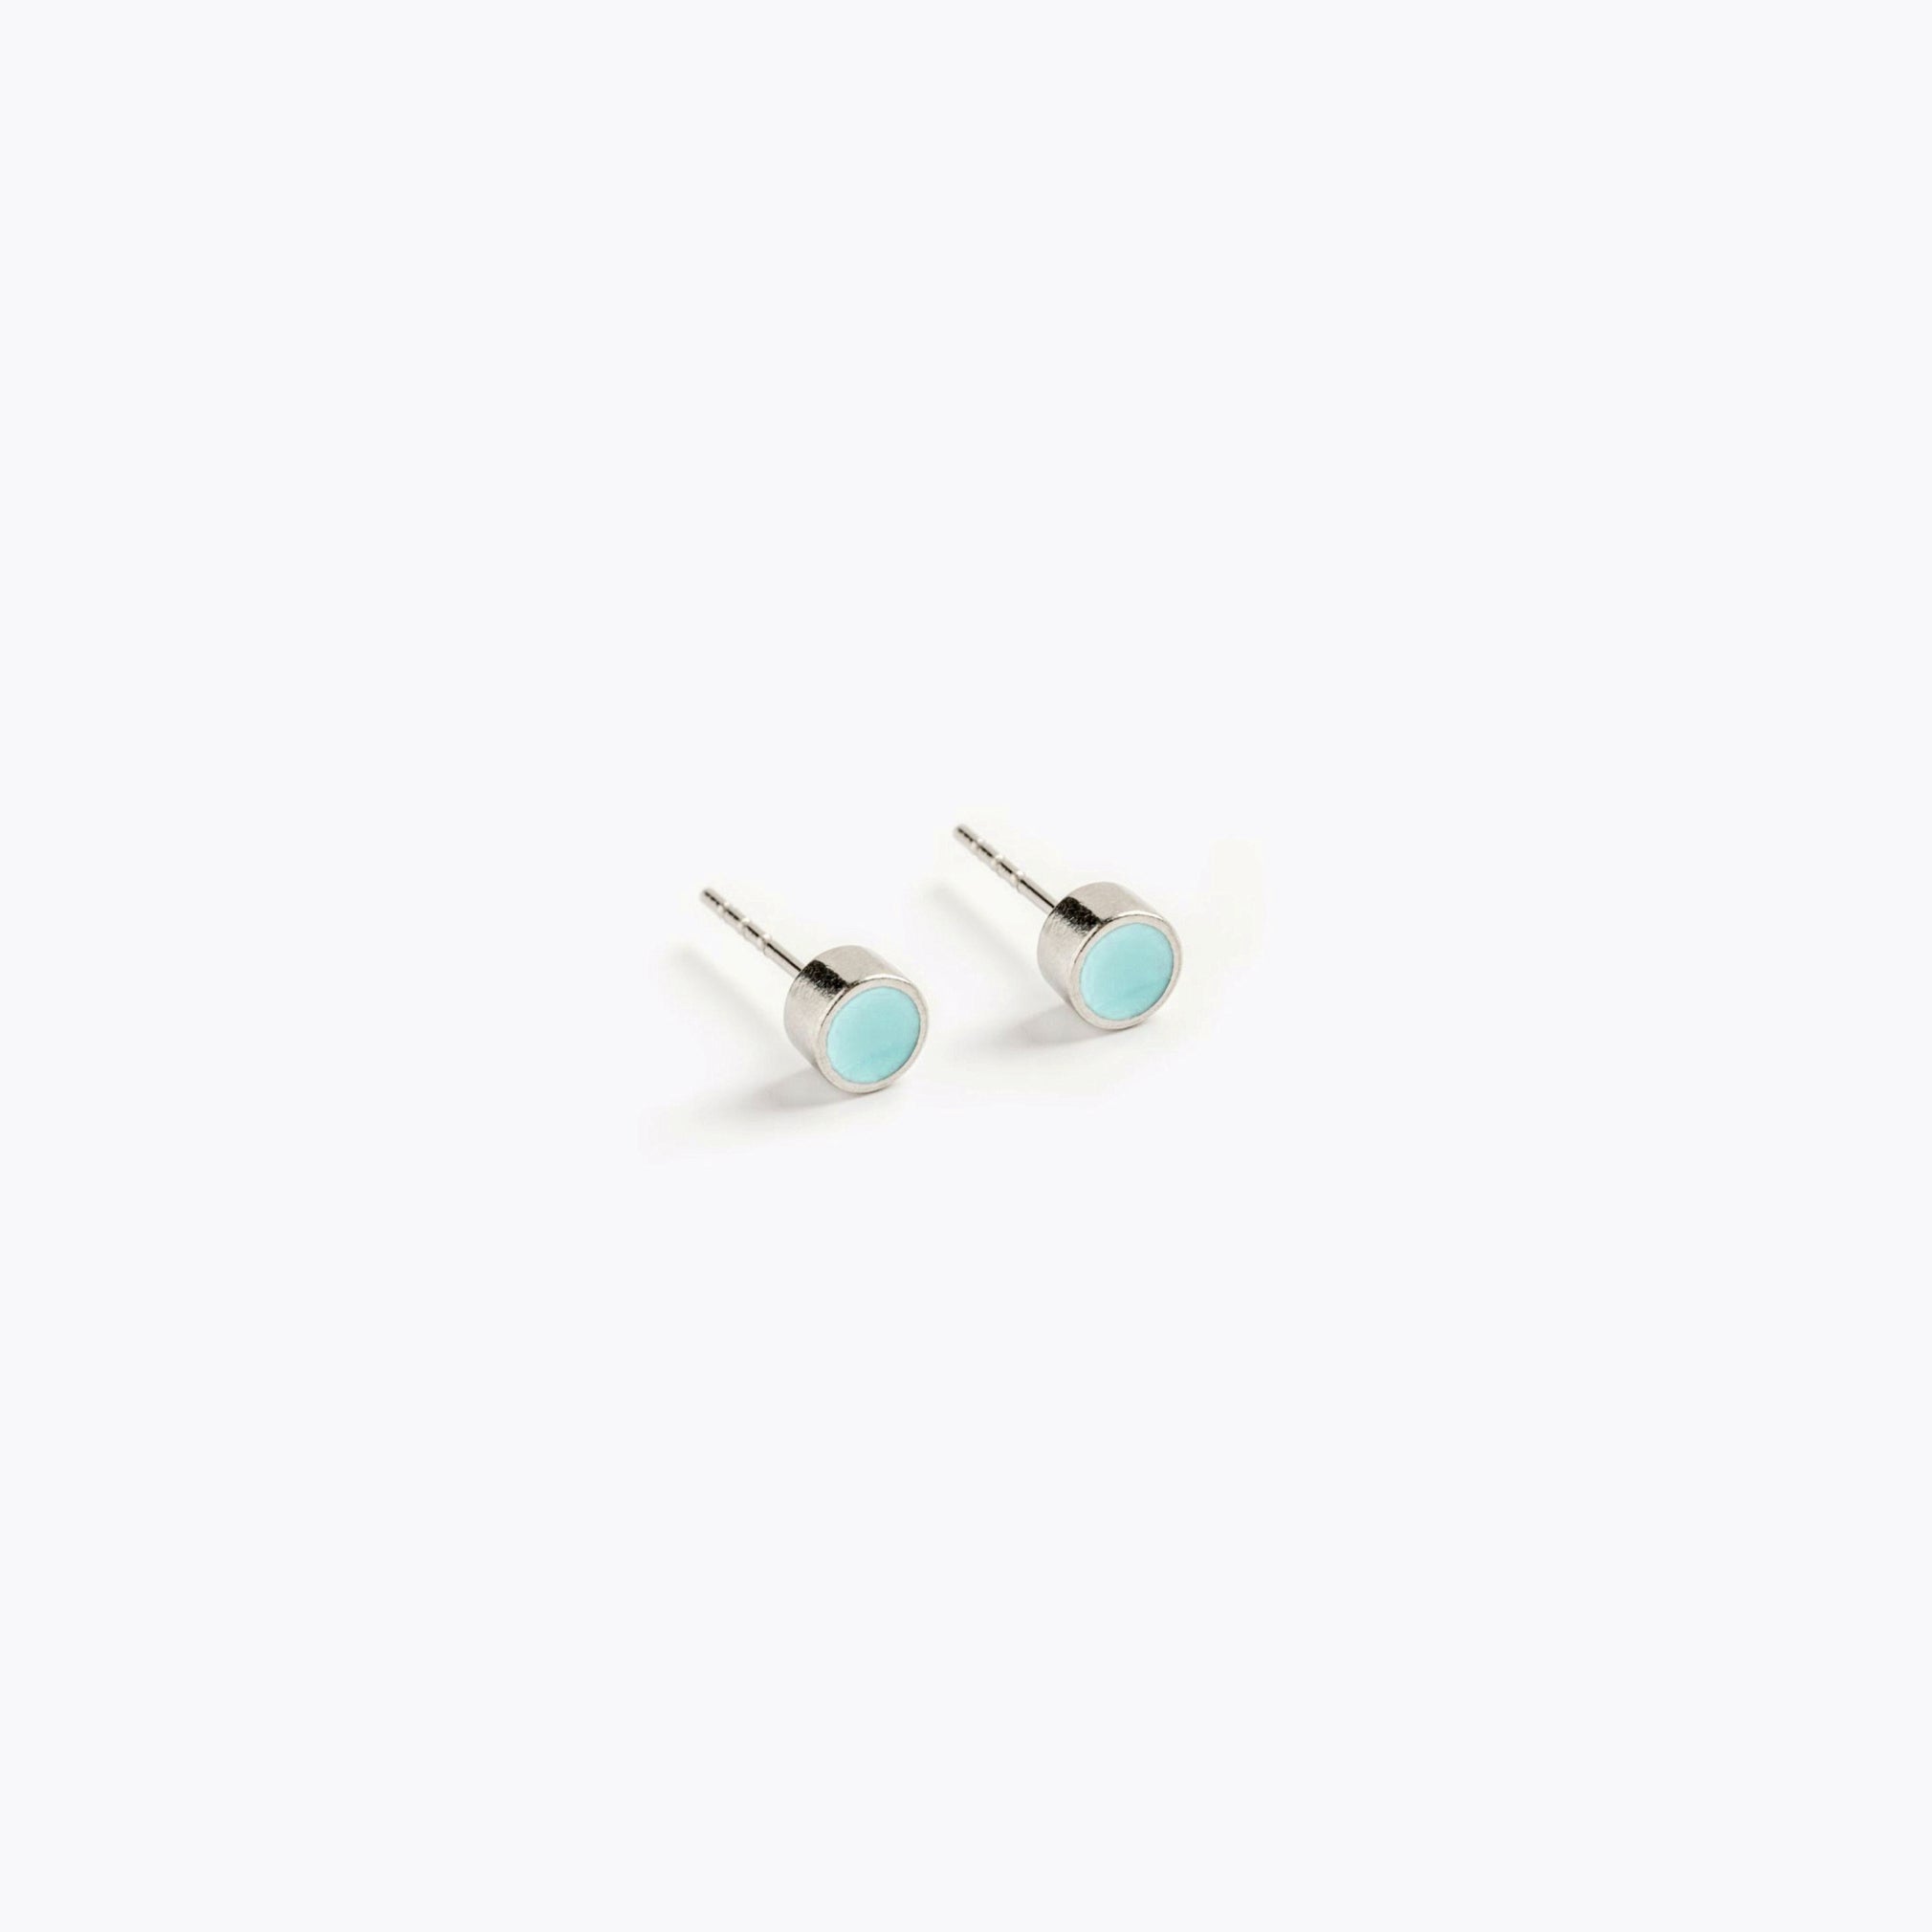 A simple pair of small, turquoise, circular stud earrings.